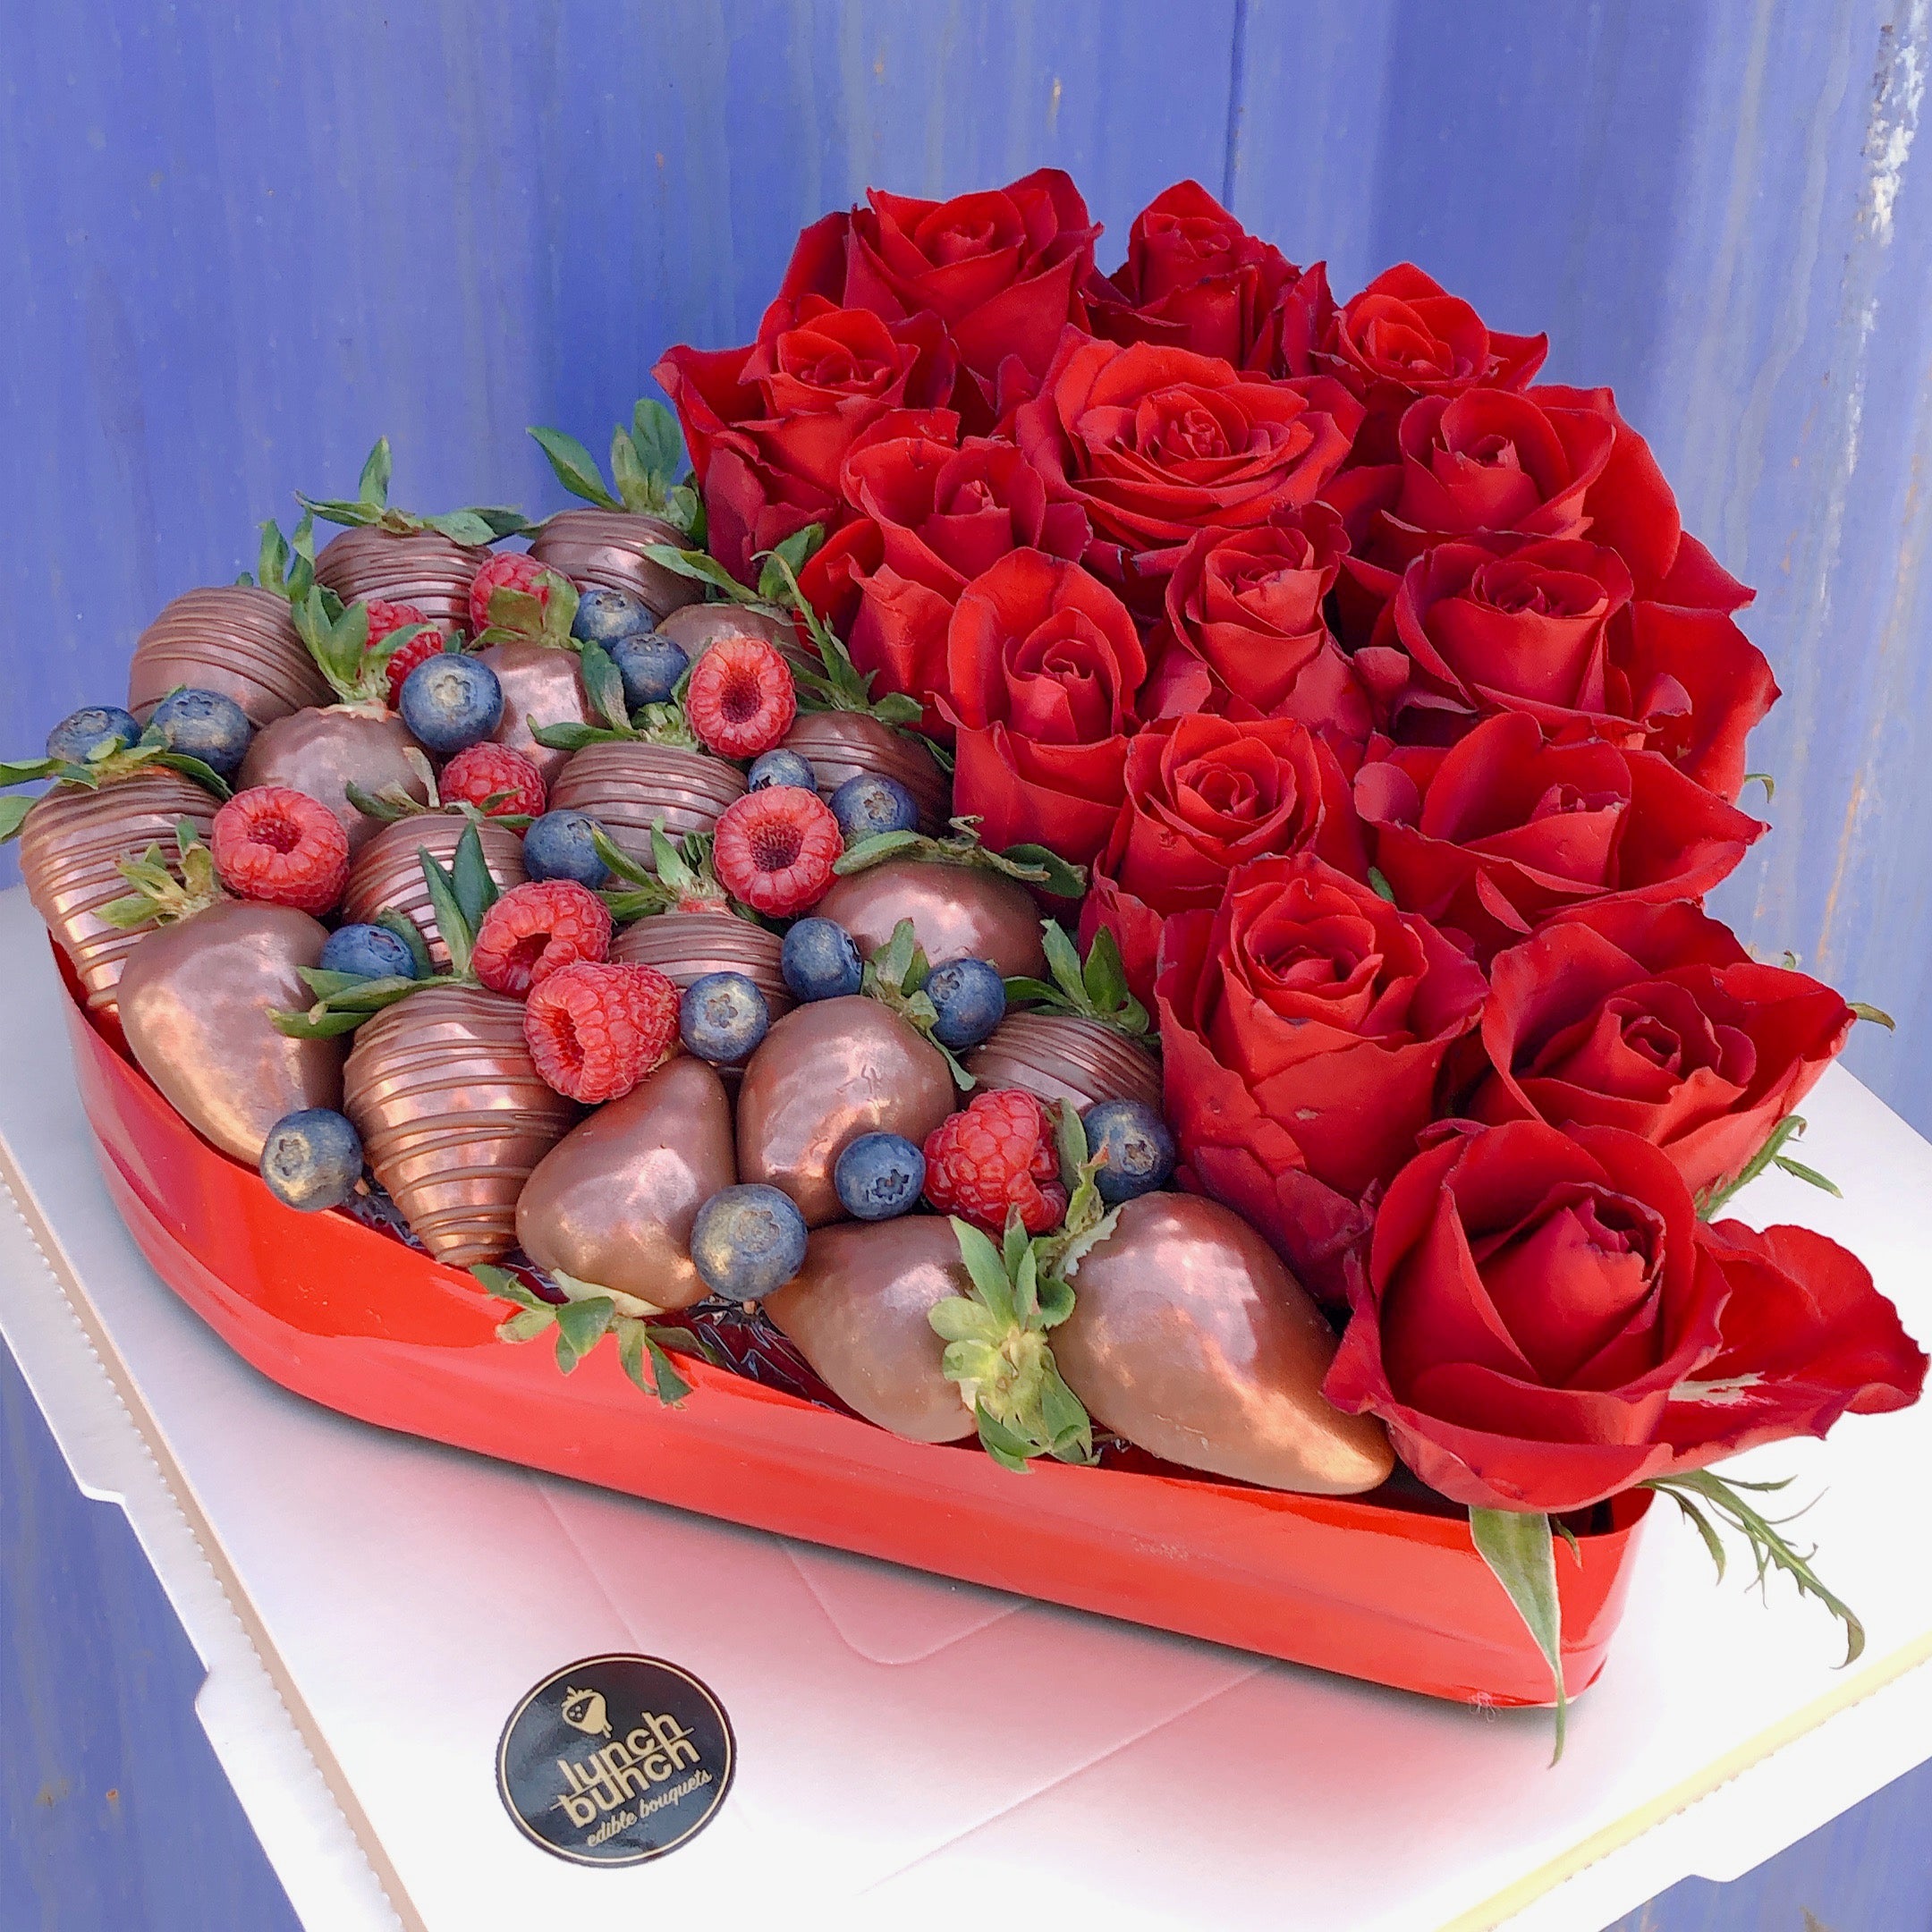 fresh strawberry covered in chocolate in love heart box with roses, heart shape flower box gift with treats